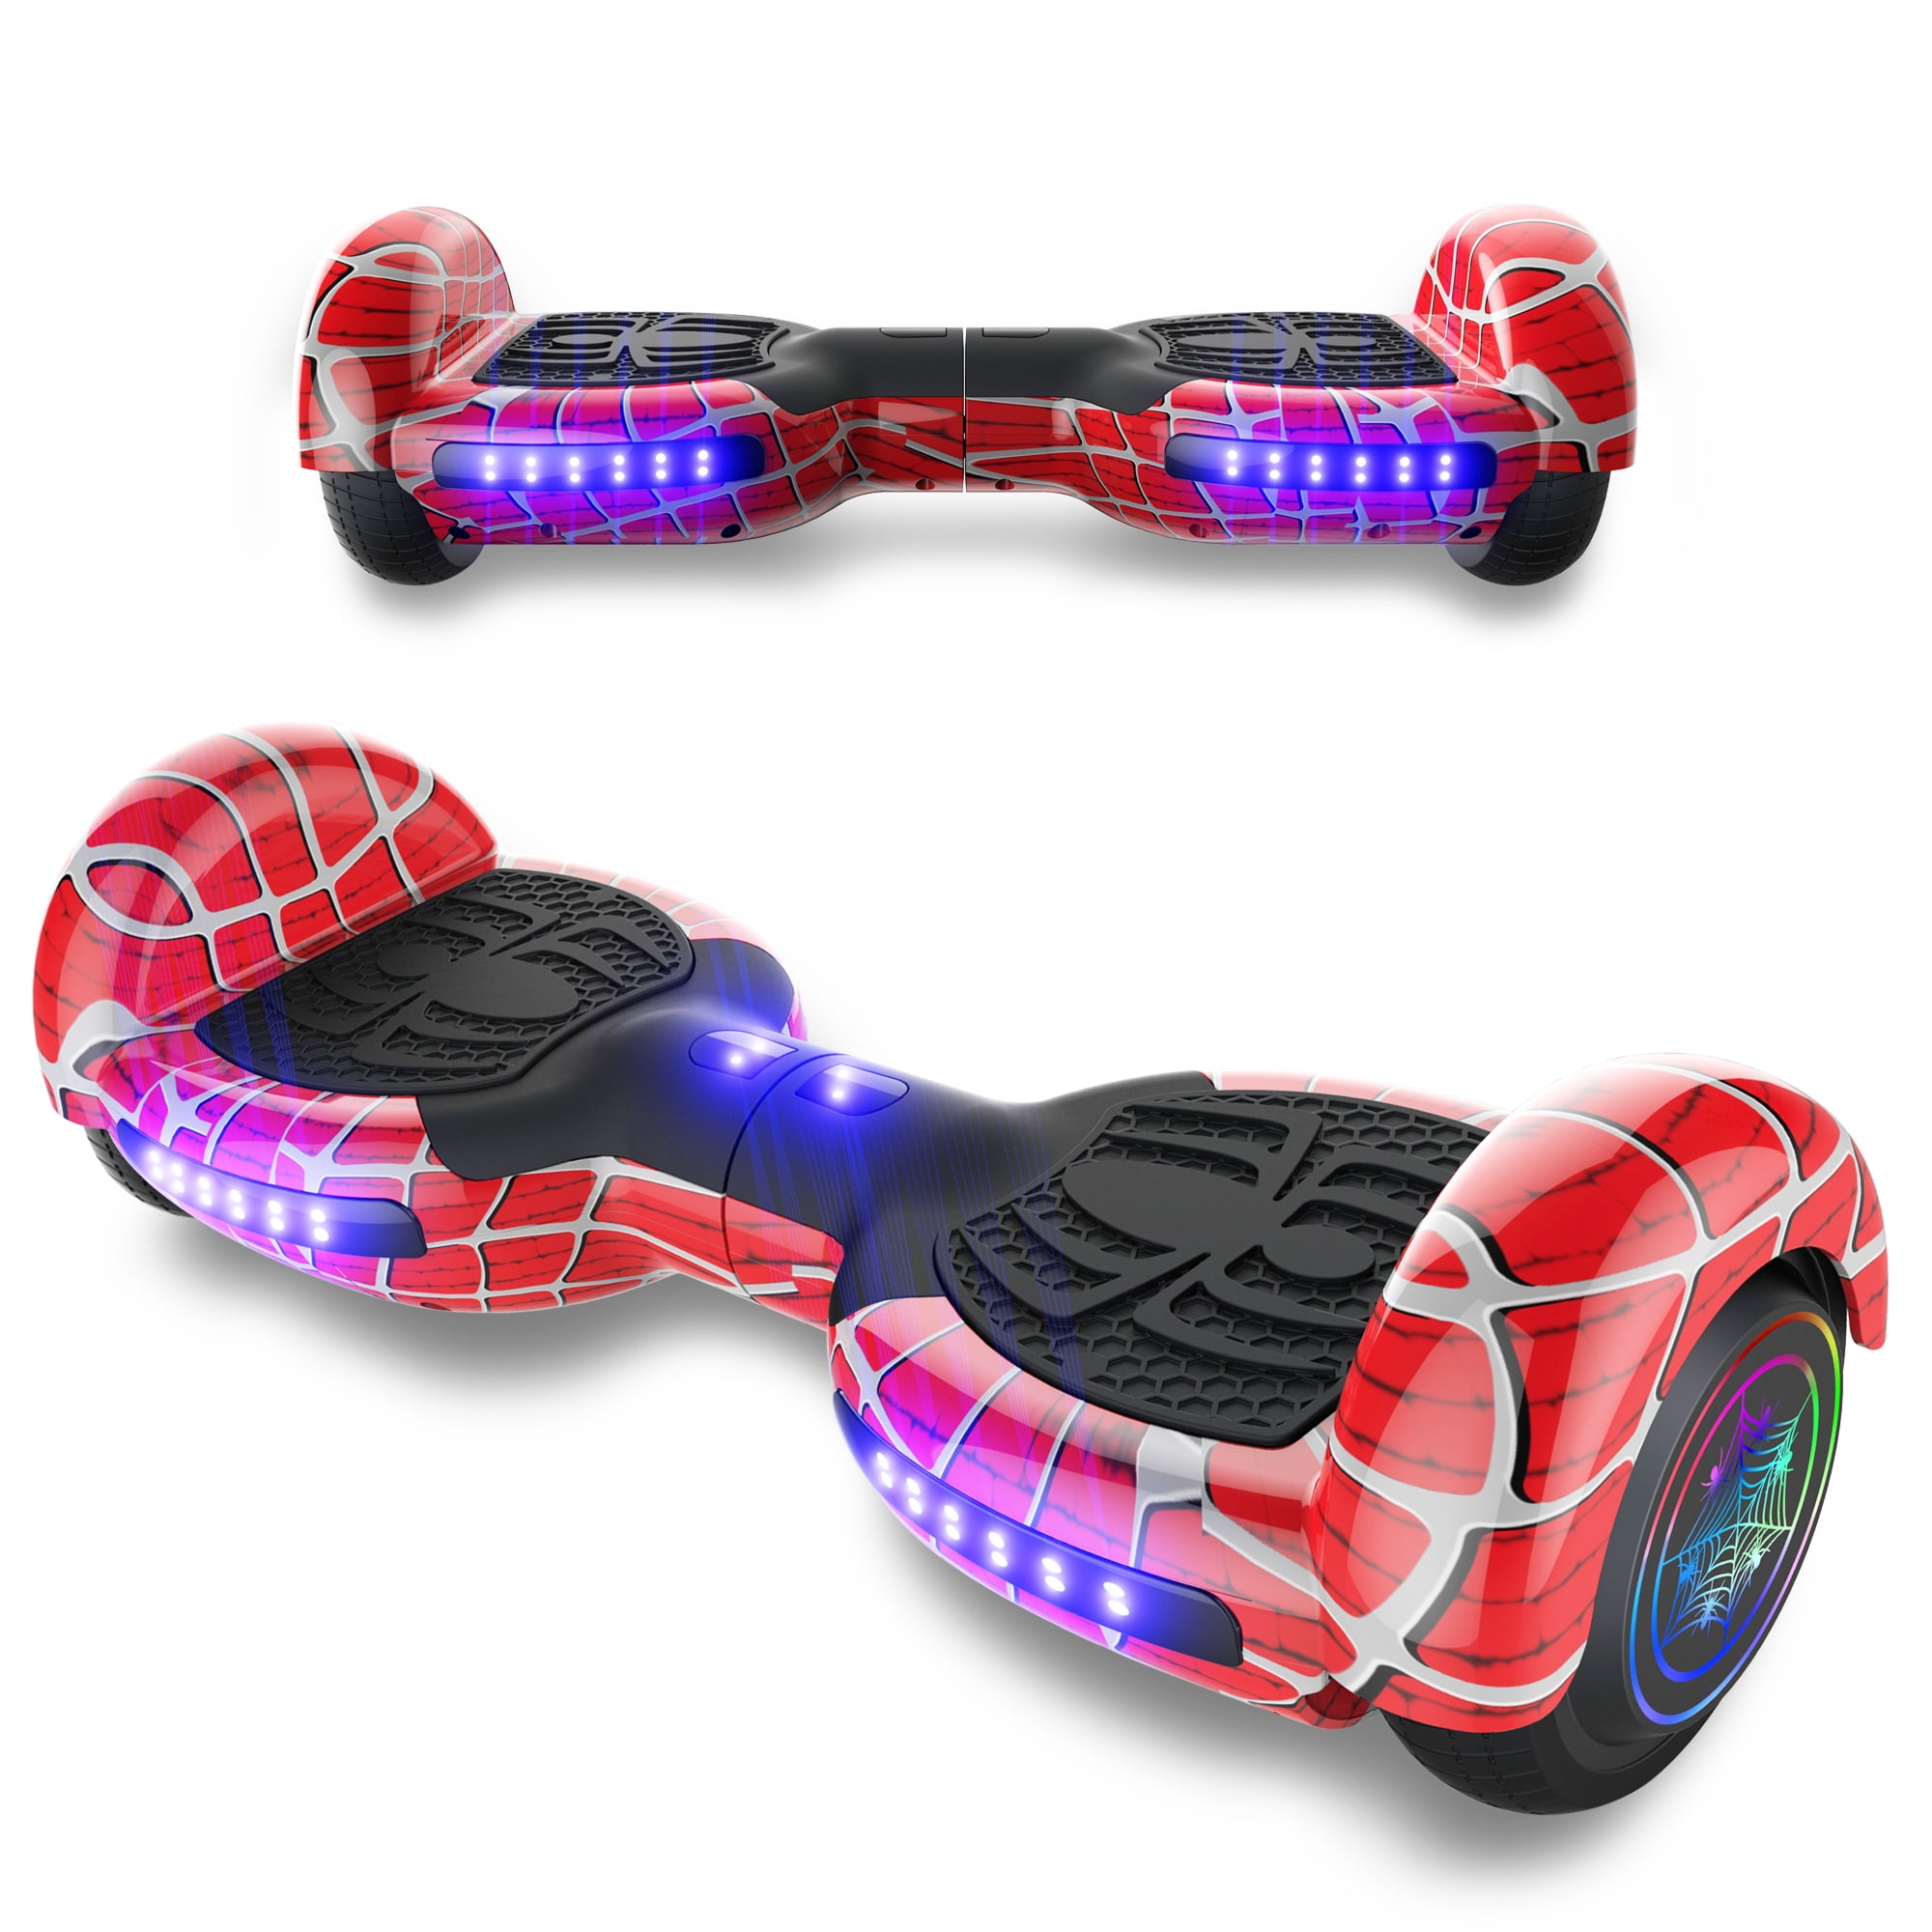 Keepower Hoverboard with Bluetooth Speaker and LED Banner Flashing Lights Two 6.5 Wheels Self-Balancing Electric Scooter Dual 300W Motors Smart Hover Board Adults Kids Gift UL2272 Certified 